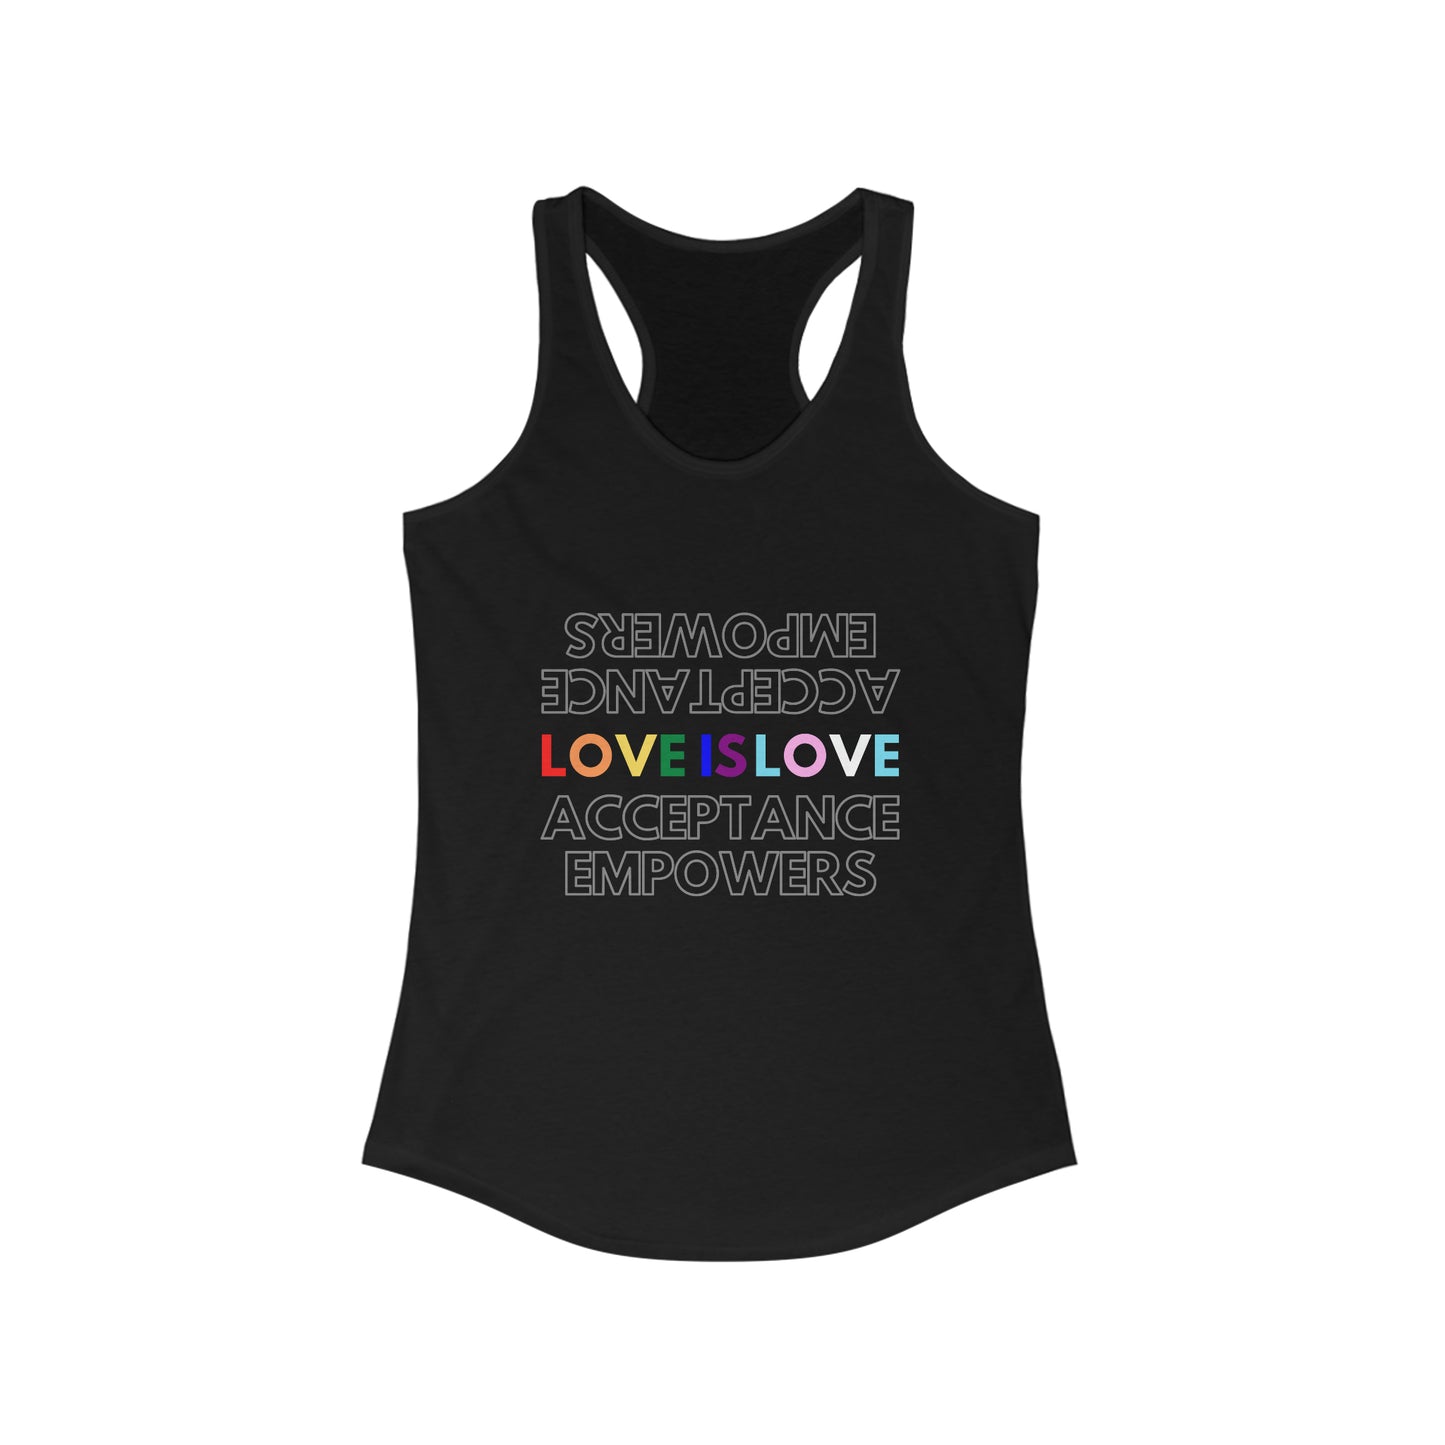 Love is Love, Acceptance Empowers Tank Top